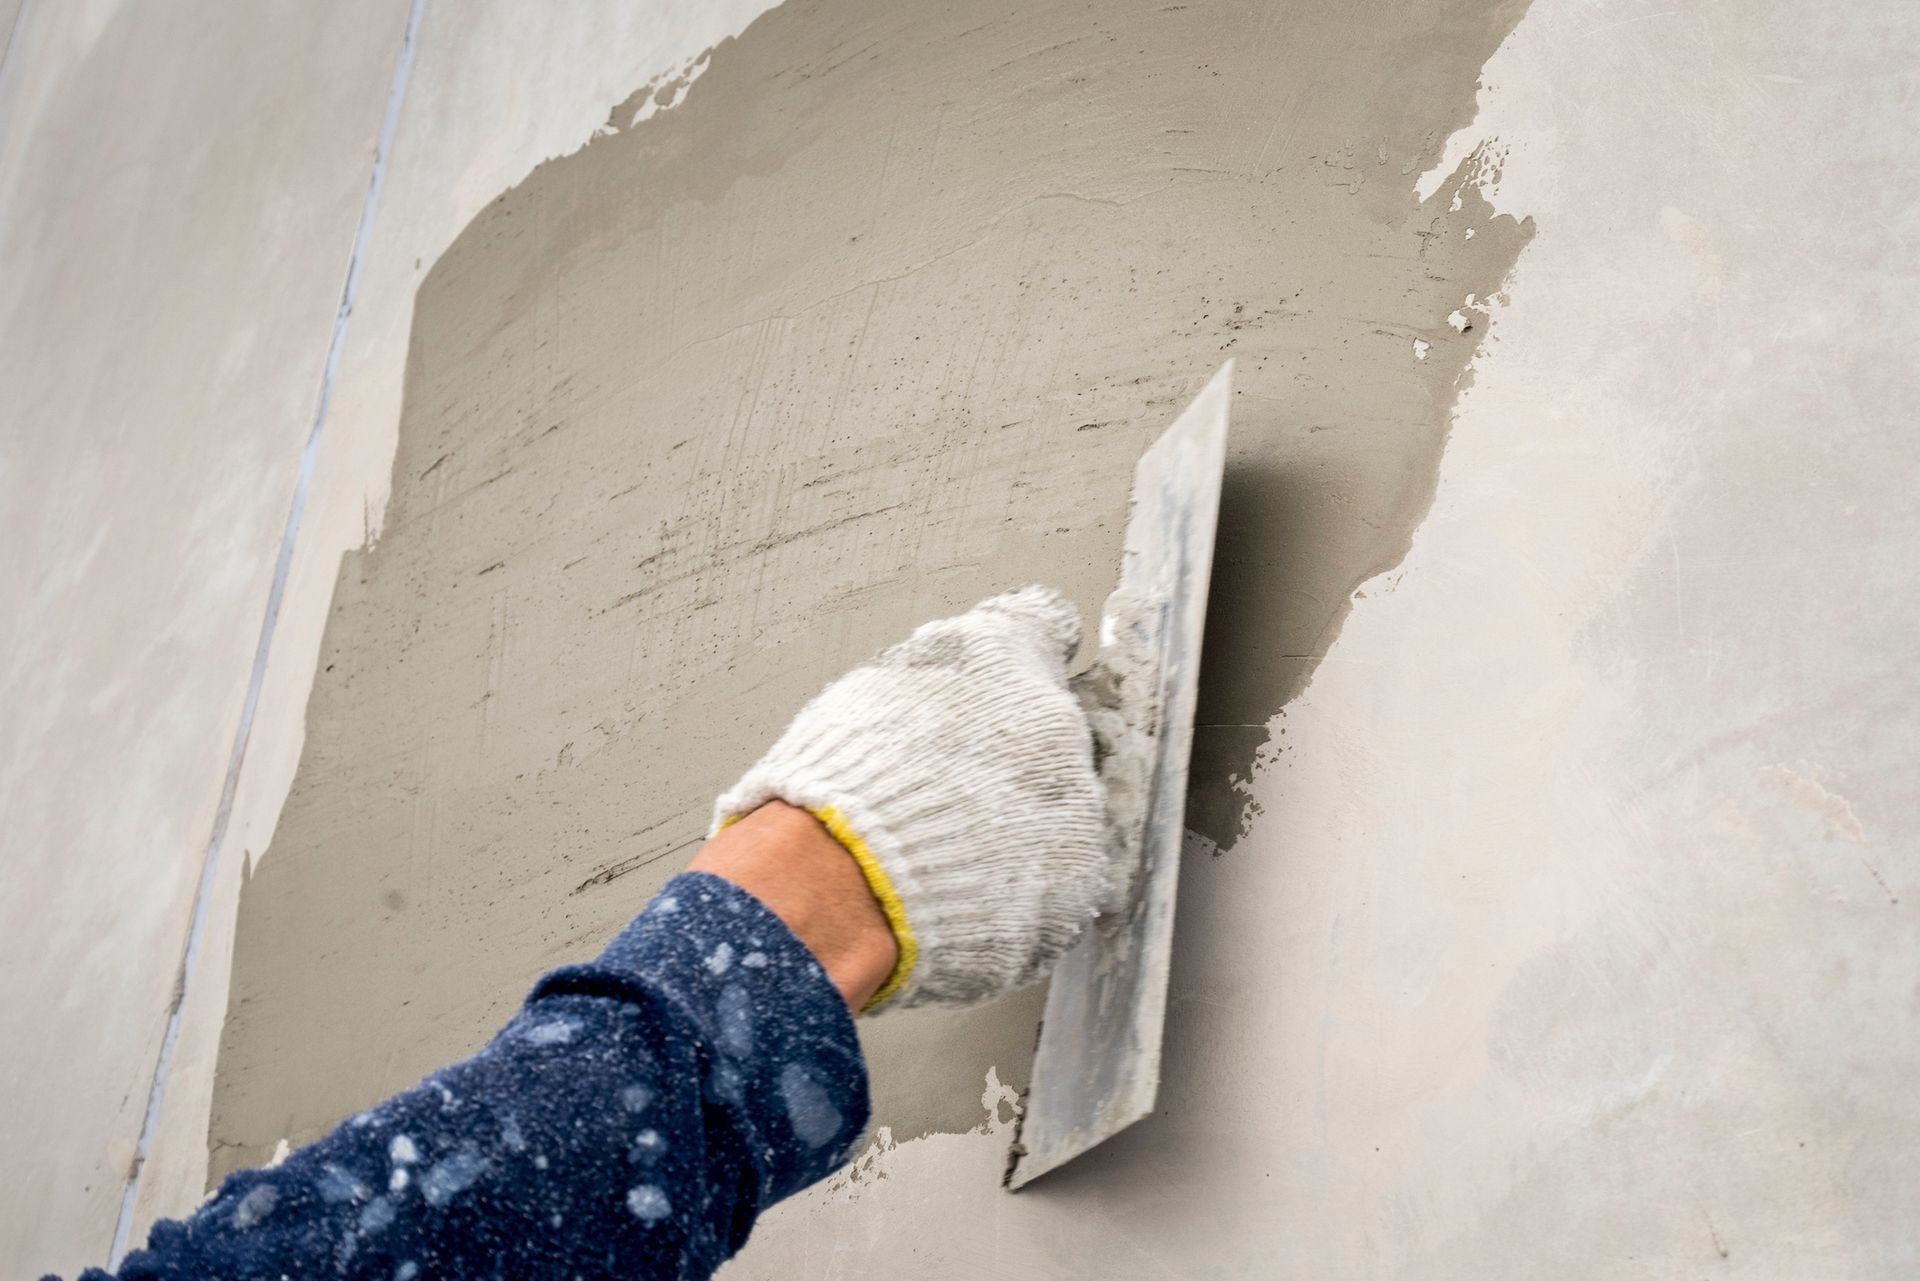 Closeup Hand Construction Plastering Wet Cement on The Loft Wall | Taylor, MI | Cooks Plastering